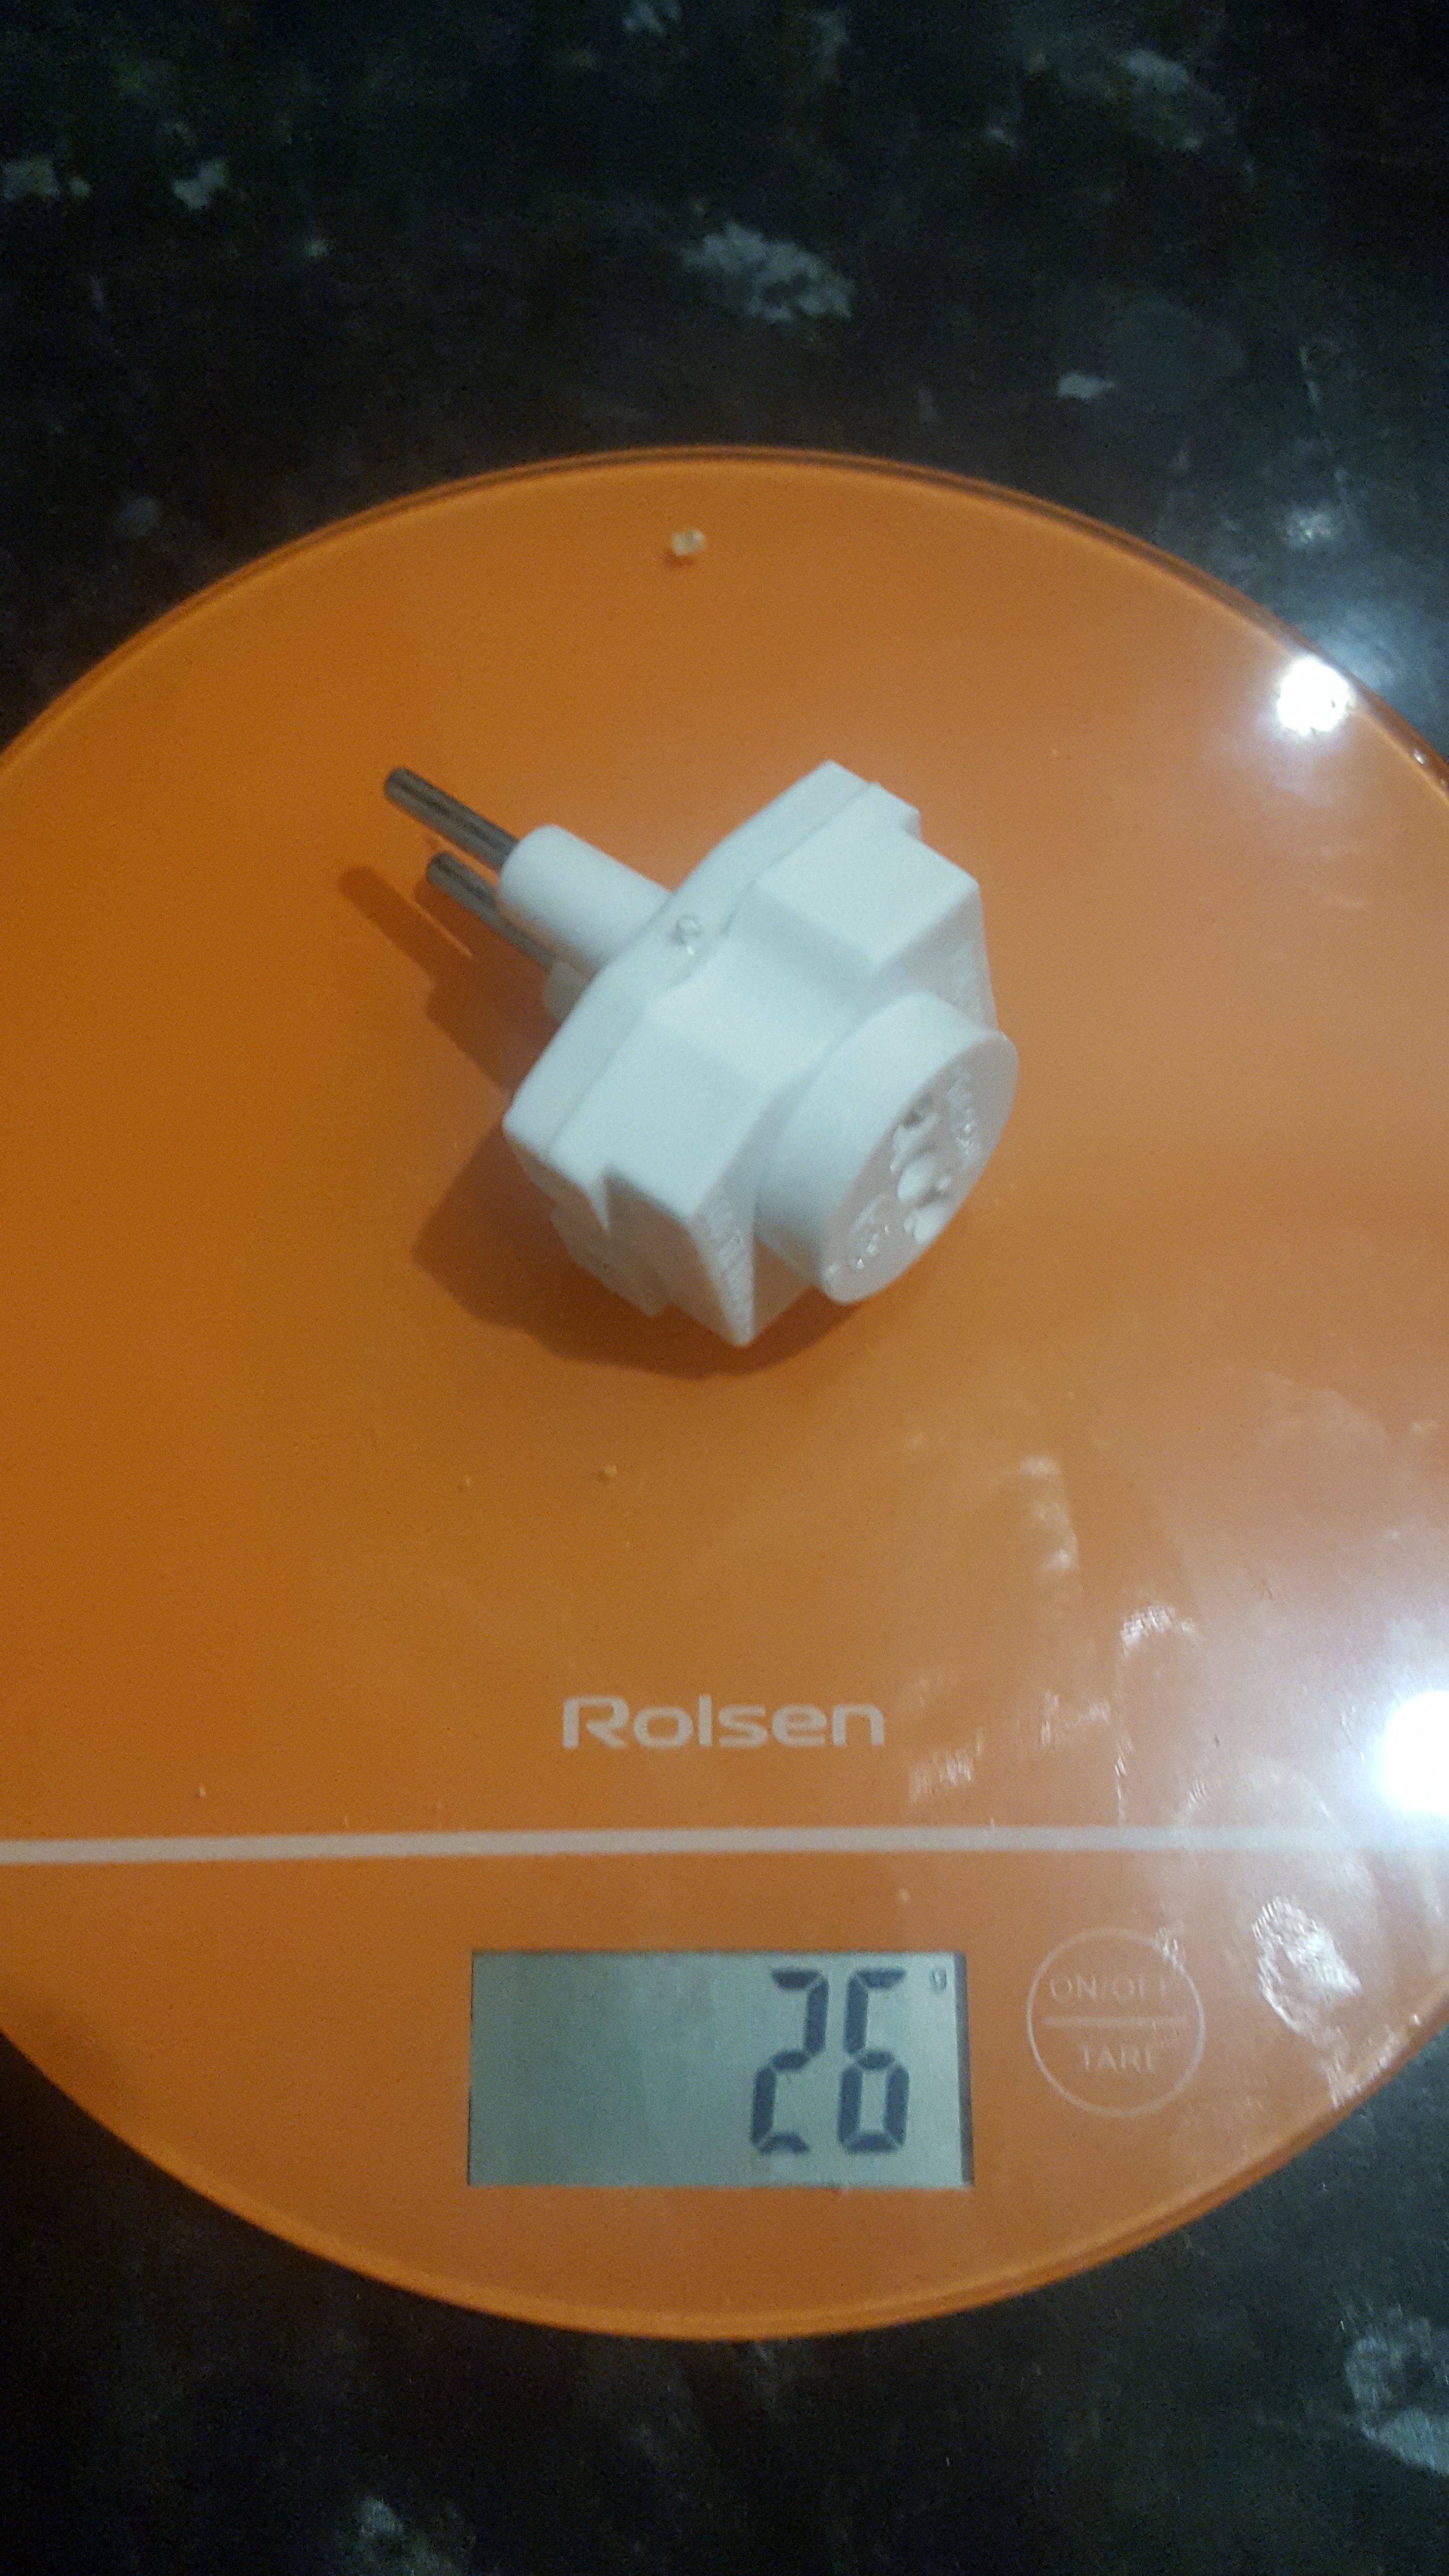 the weight of the socket adapter